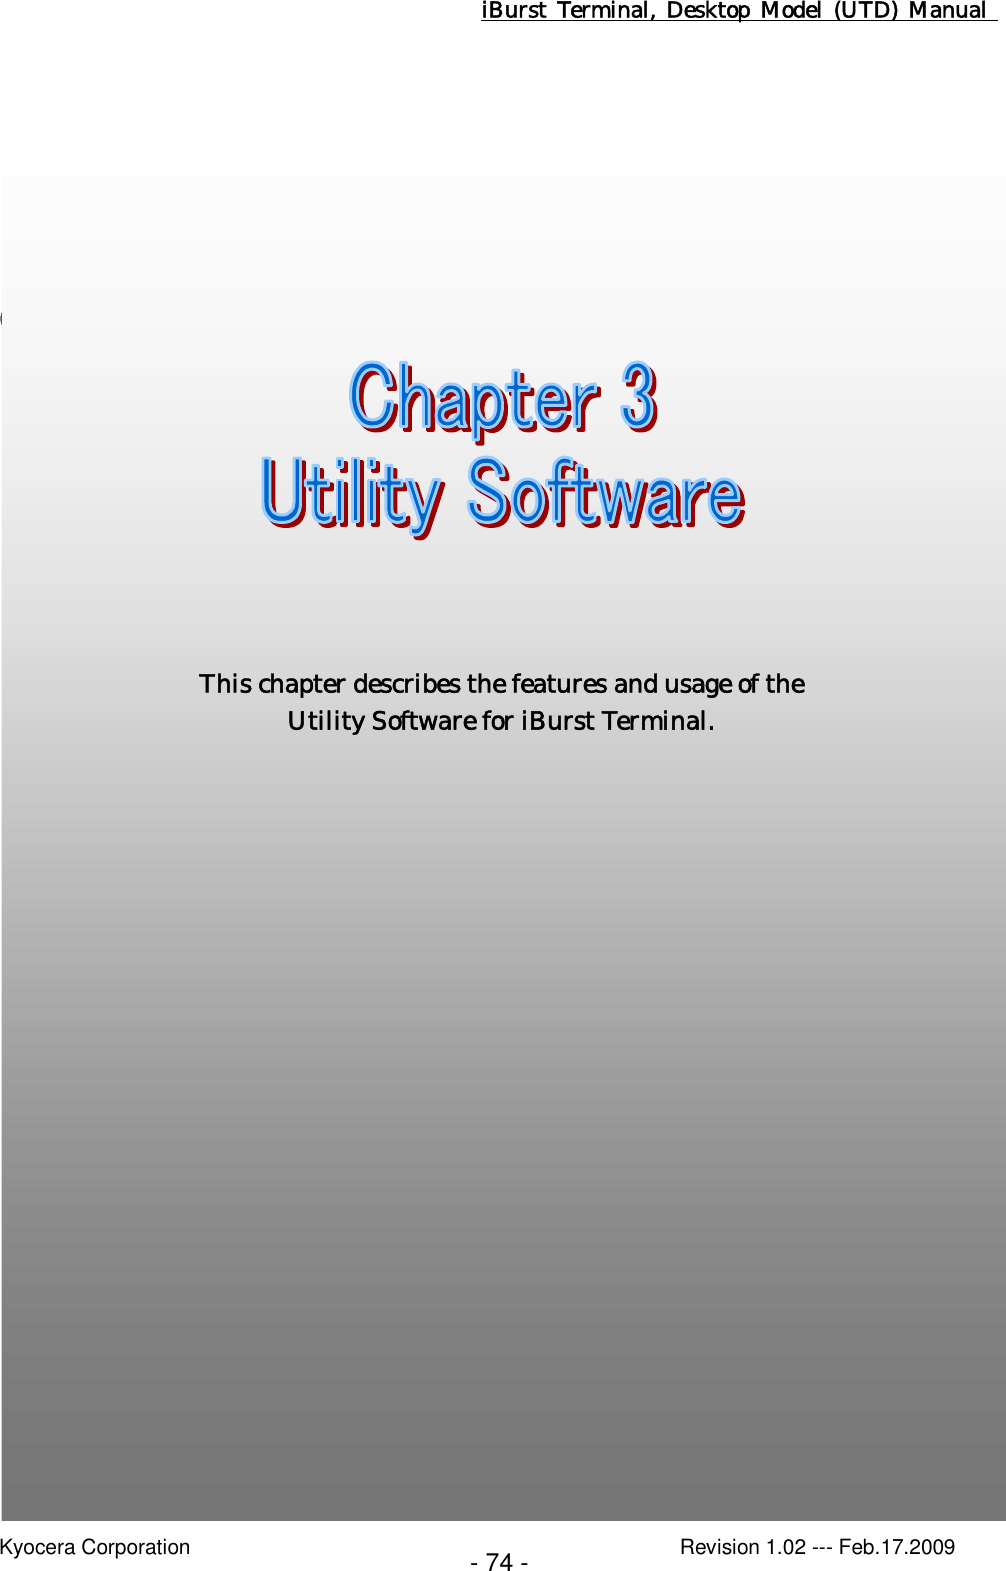 iBurst  Terminal, Desktop  Model  (UTD)  Manual    Kyocera Corporation                                                                                              Revision 1.02 --- Feb.17.2009 - 74 -       Chapter 3 Utility Software                                This chapter describes the features and usage of the Utility Software for iBurst Terminal. 